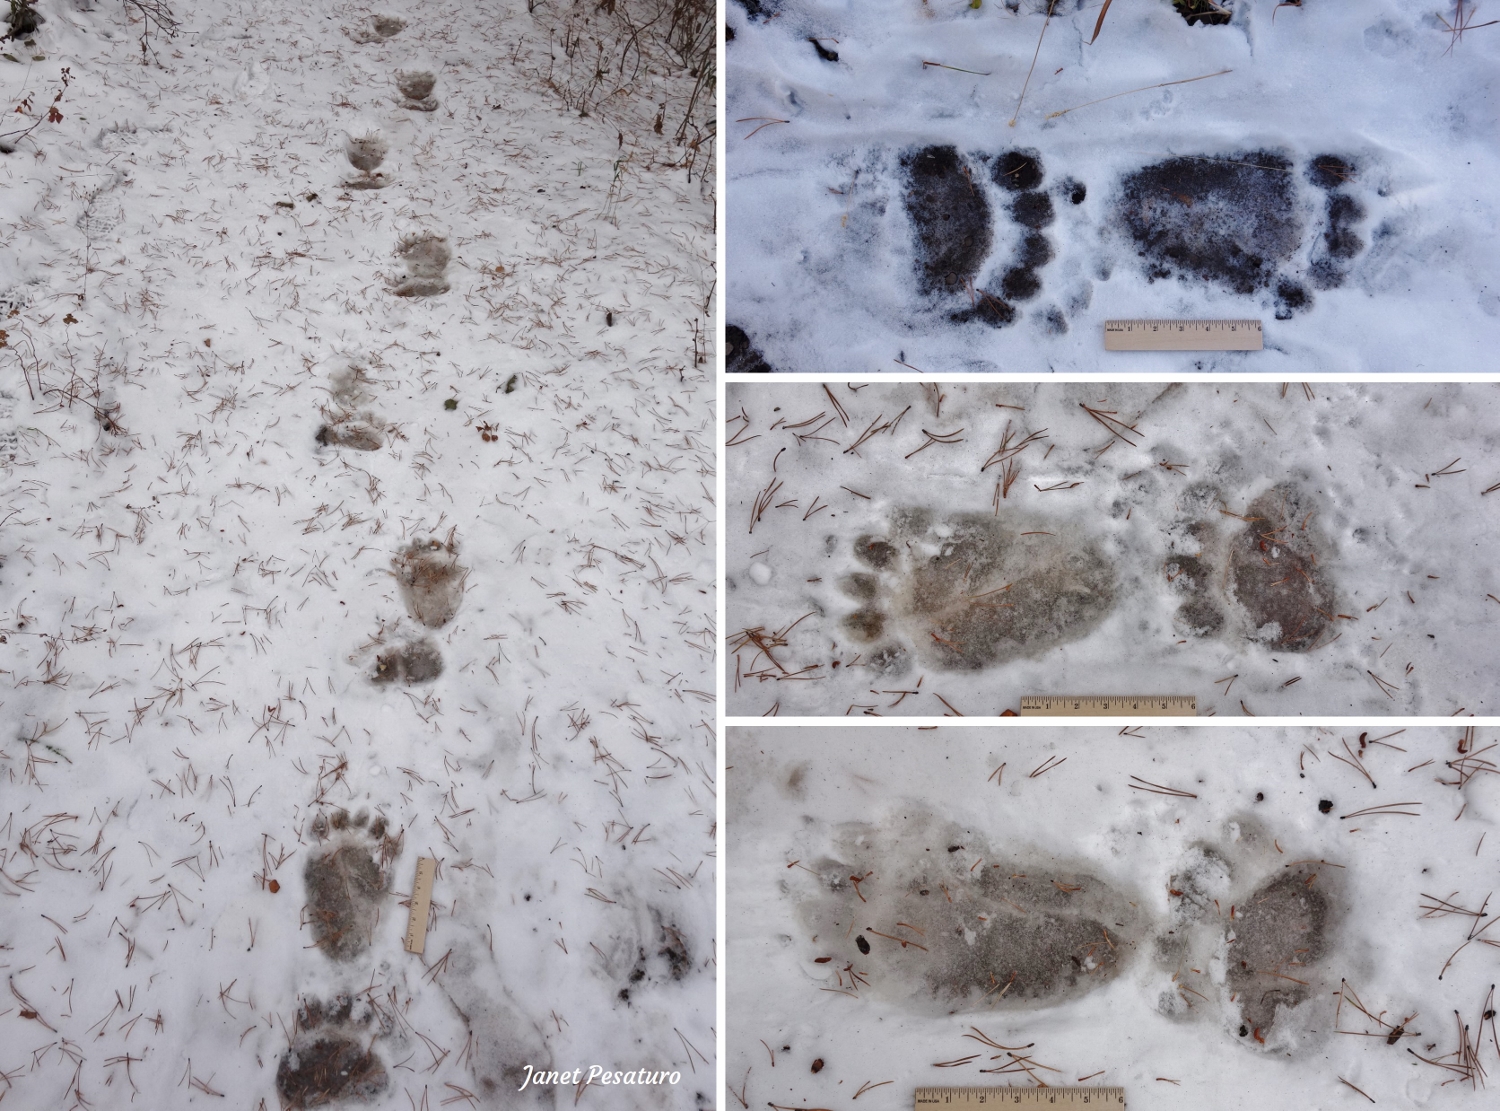 grizzly vs black bear tracks, these are grizzly